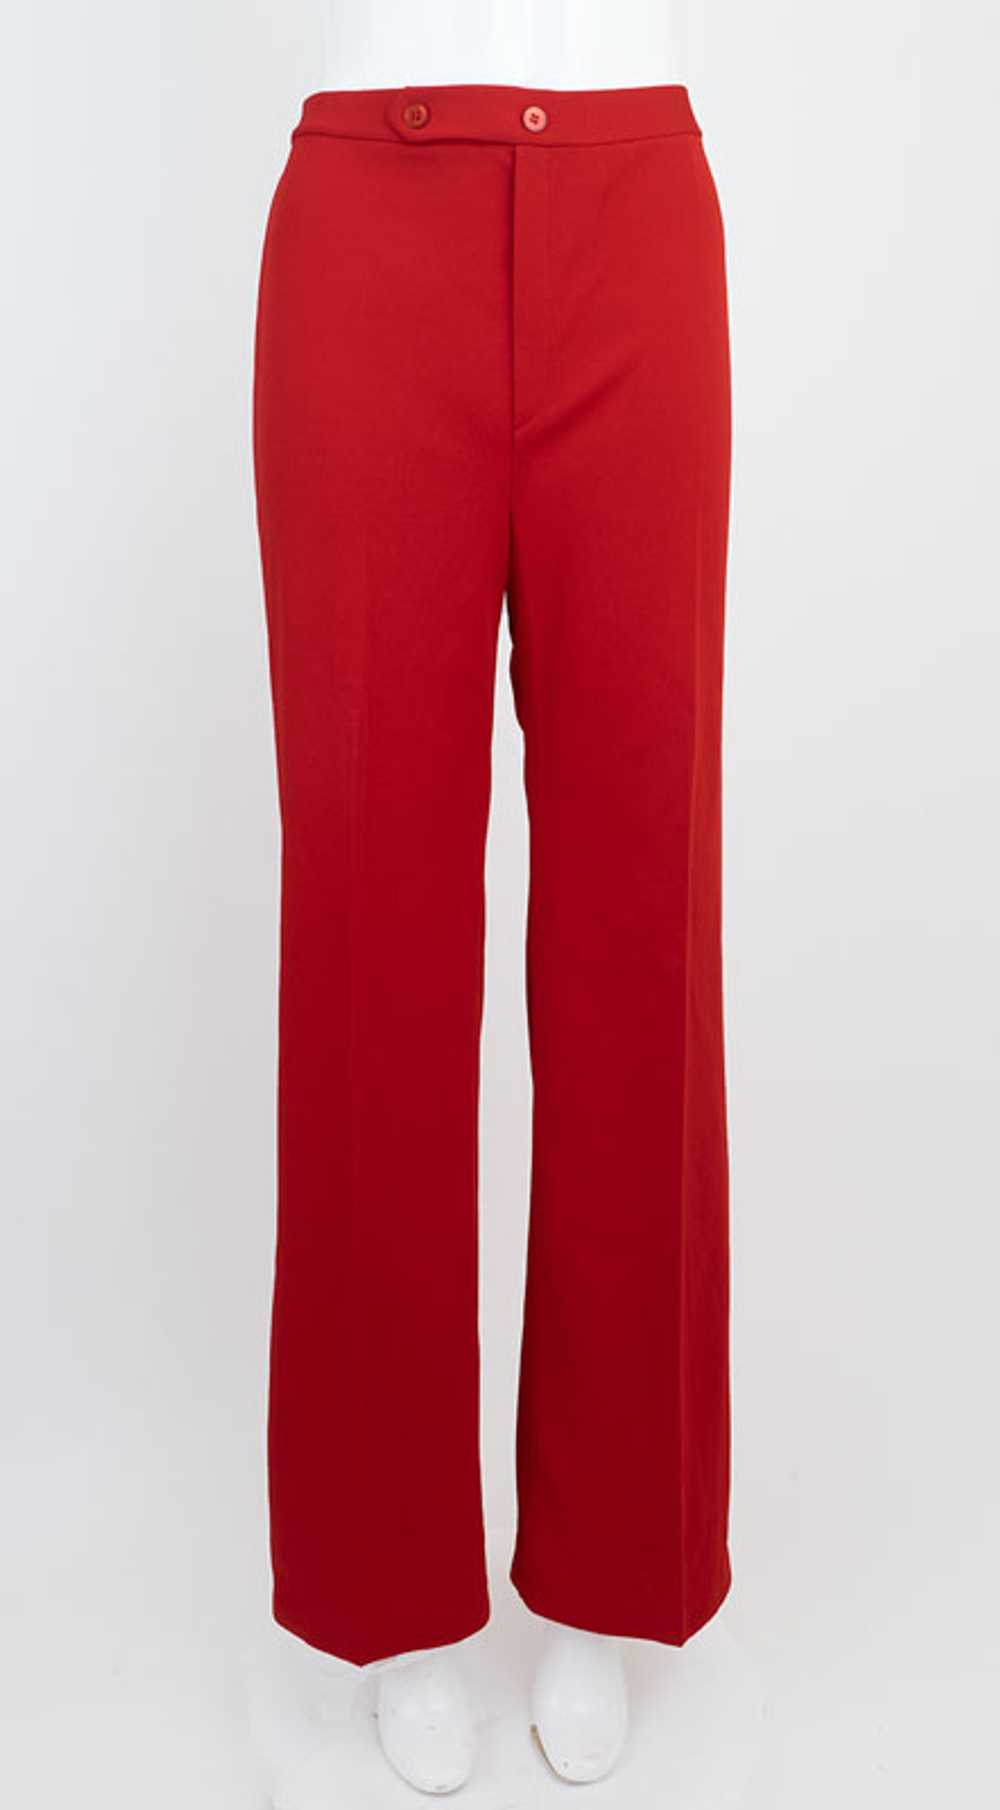 1970s Red Flared Pants - image 1